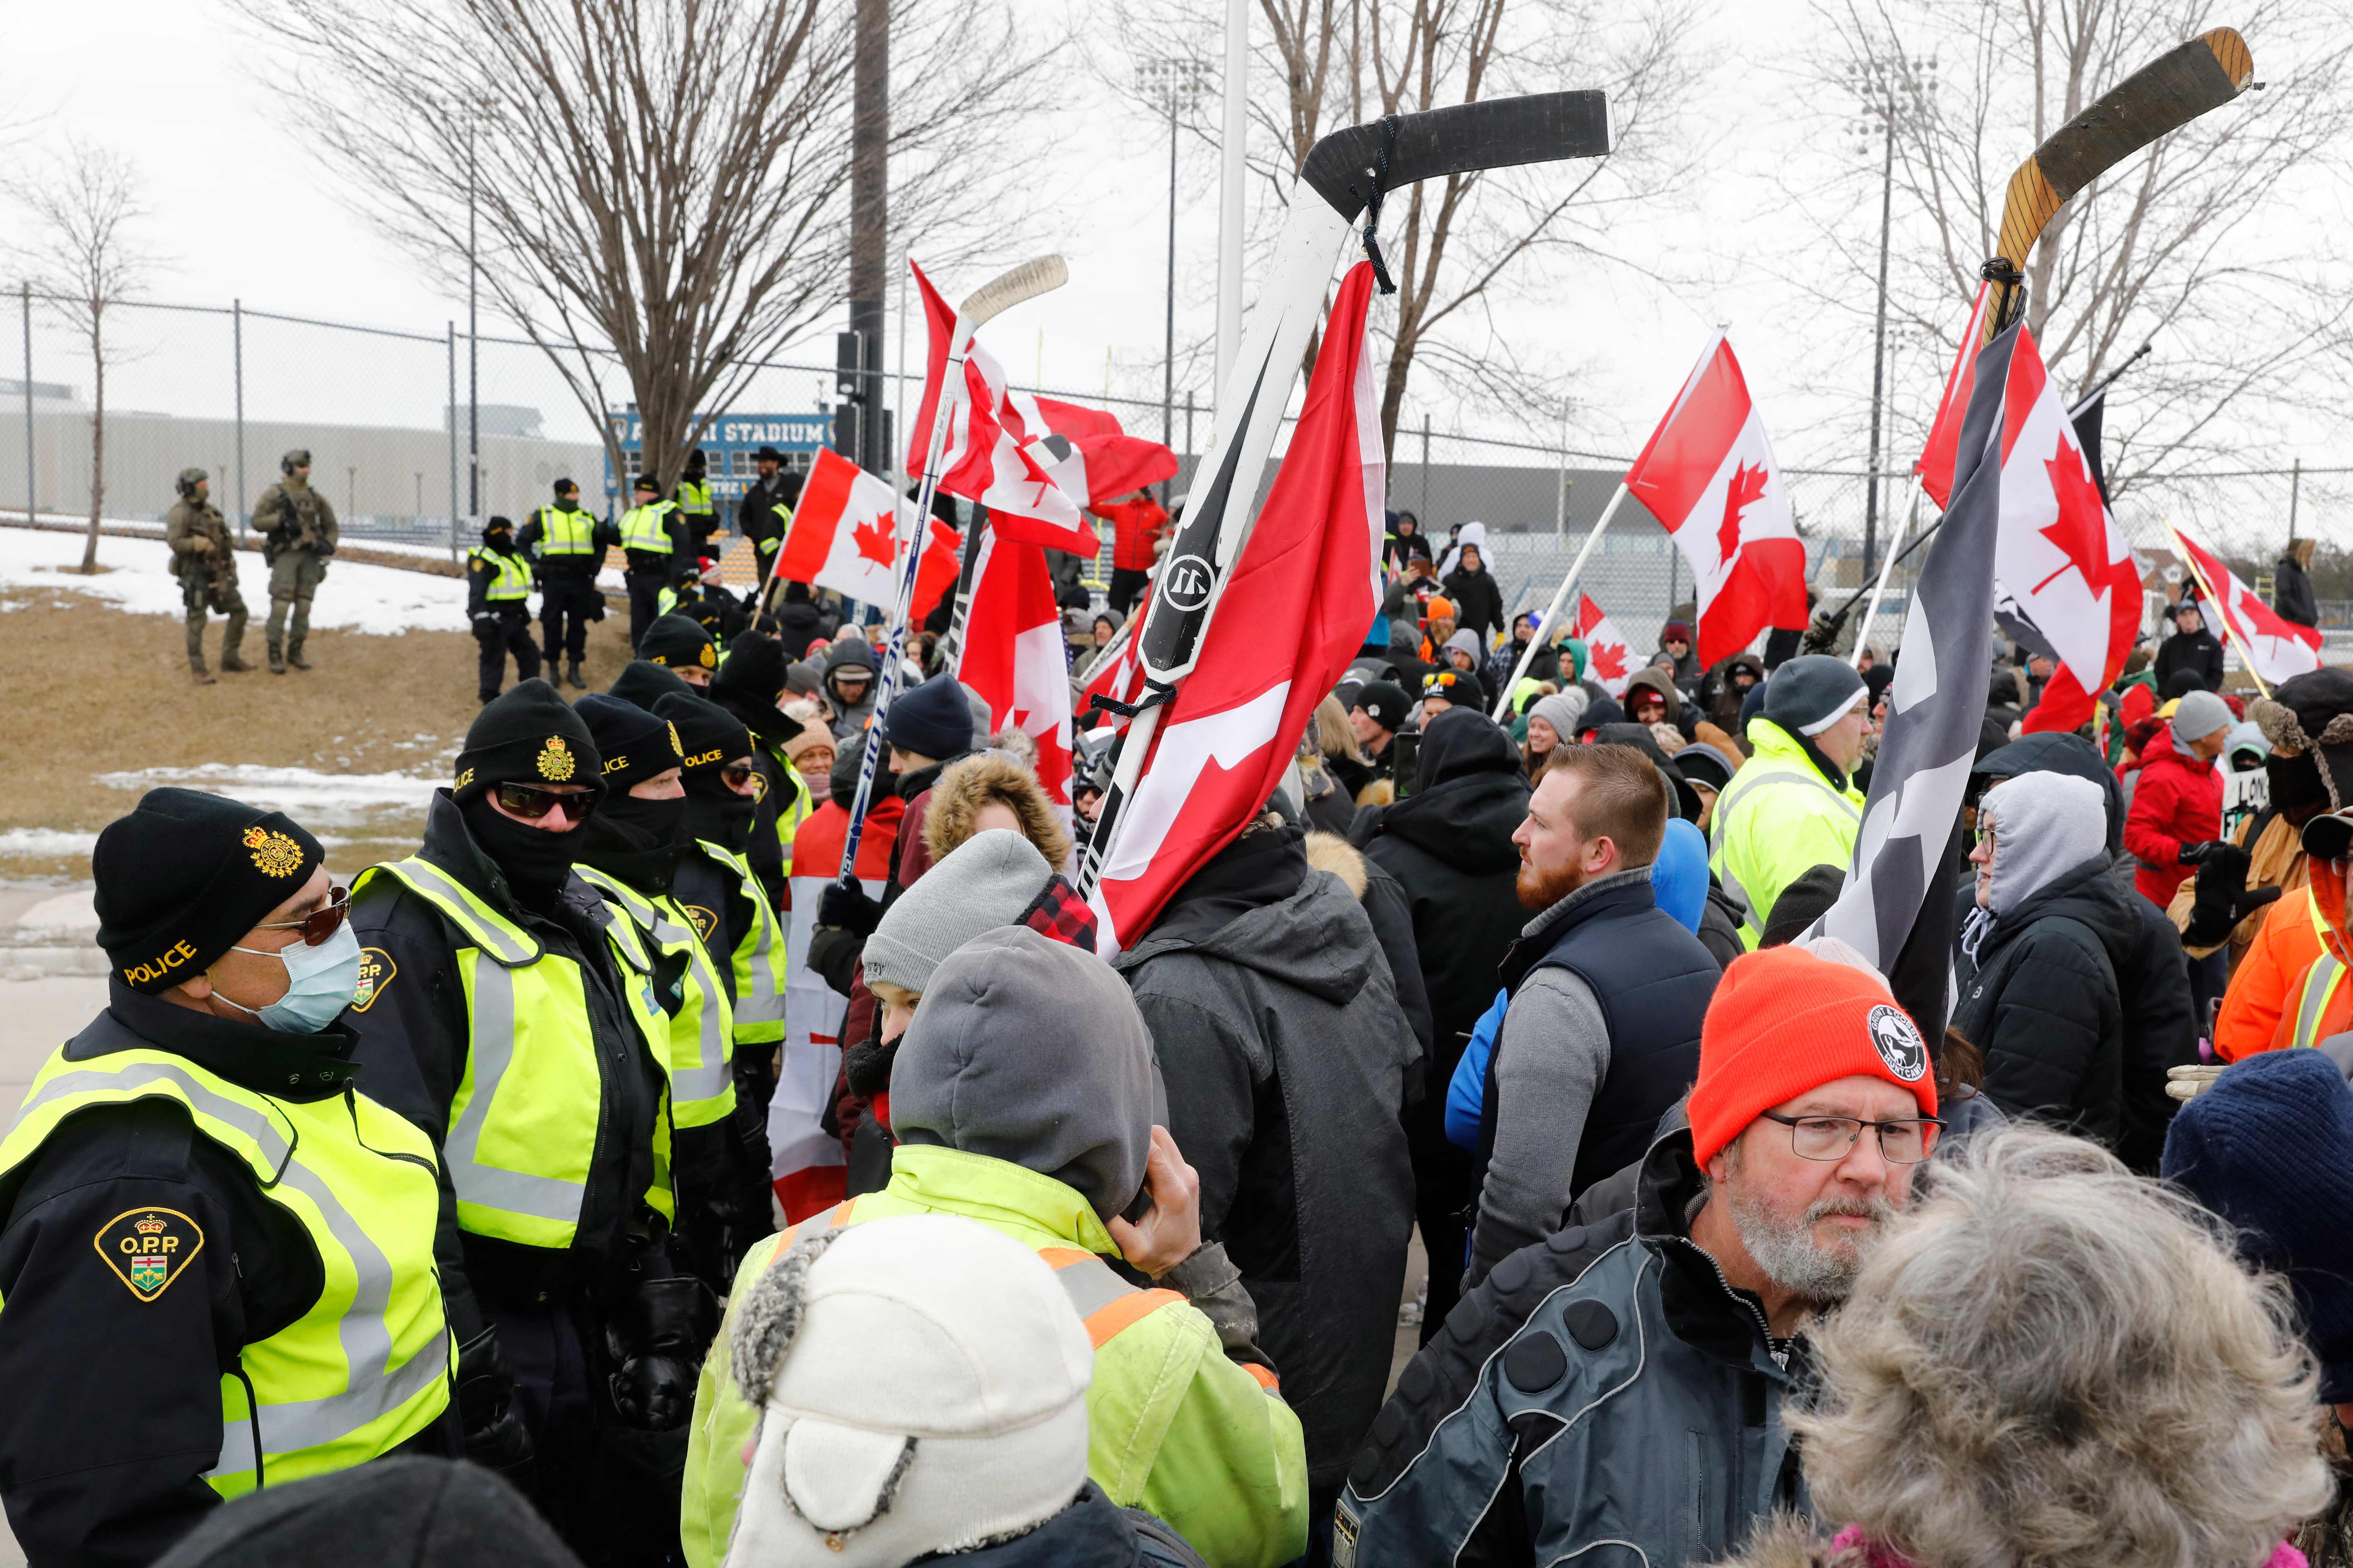 Canadian police were called in to tackle protests on the Ambassador Bridge in Windsor, Ontario